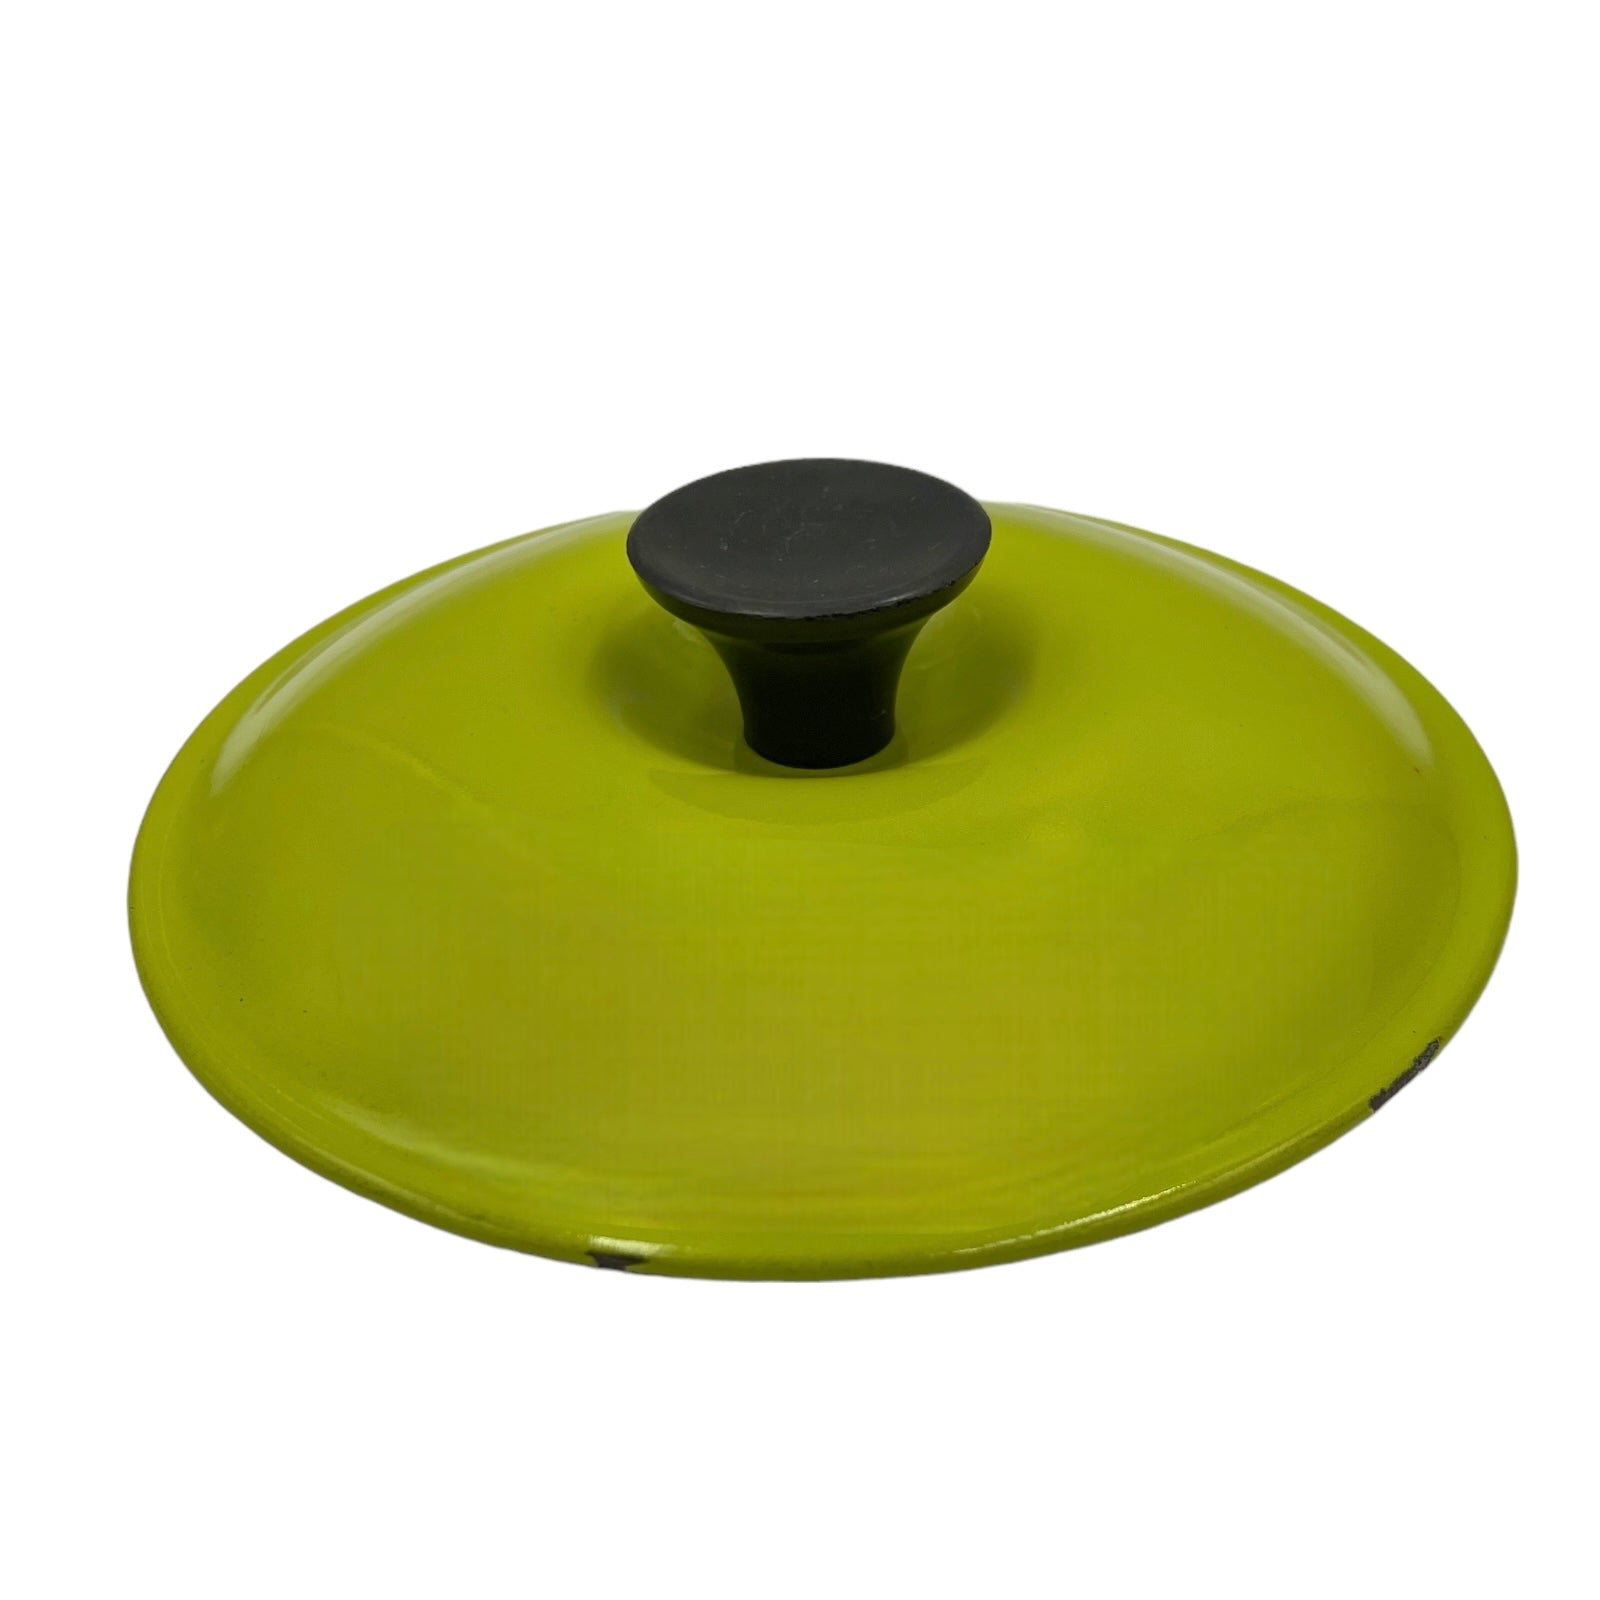 Vintage French cast iron lime green pan lid 